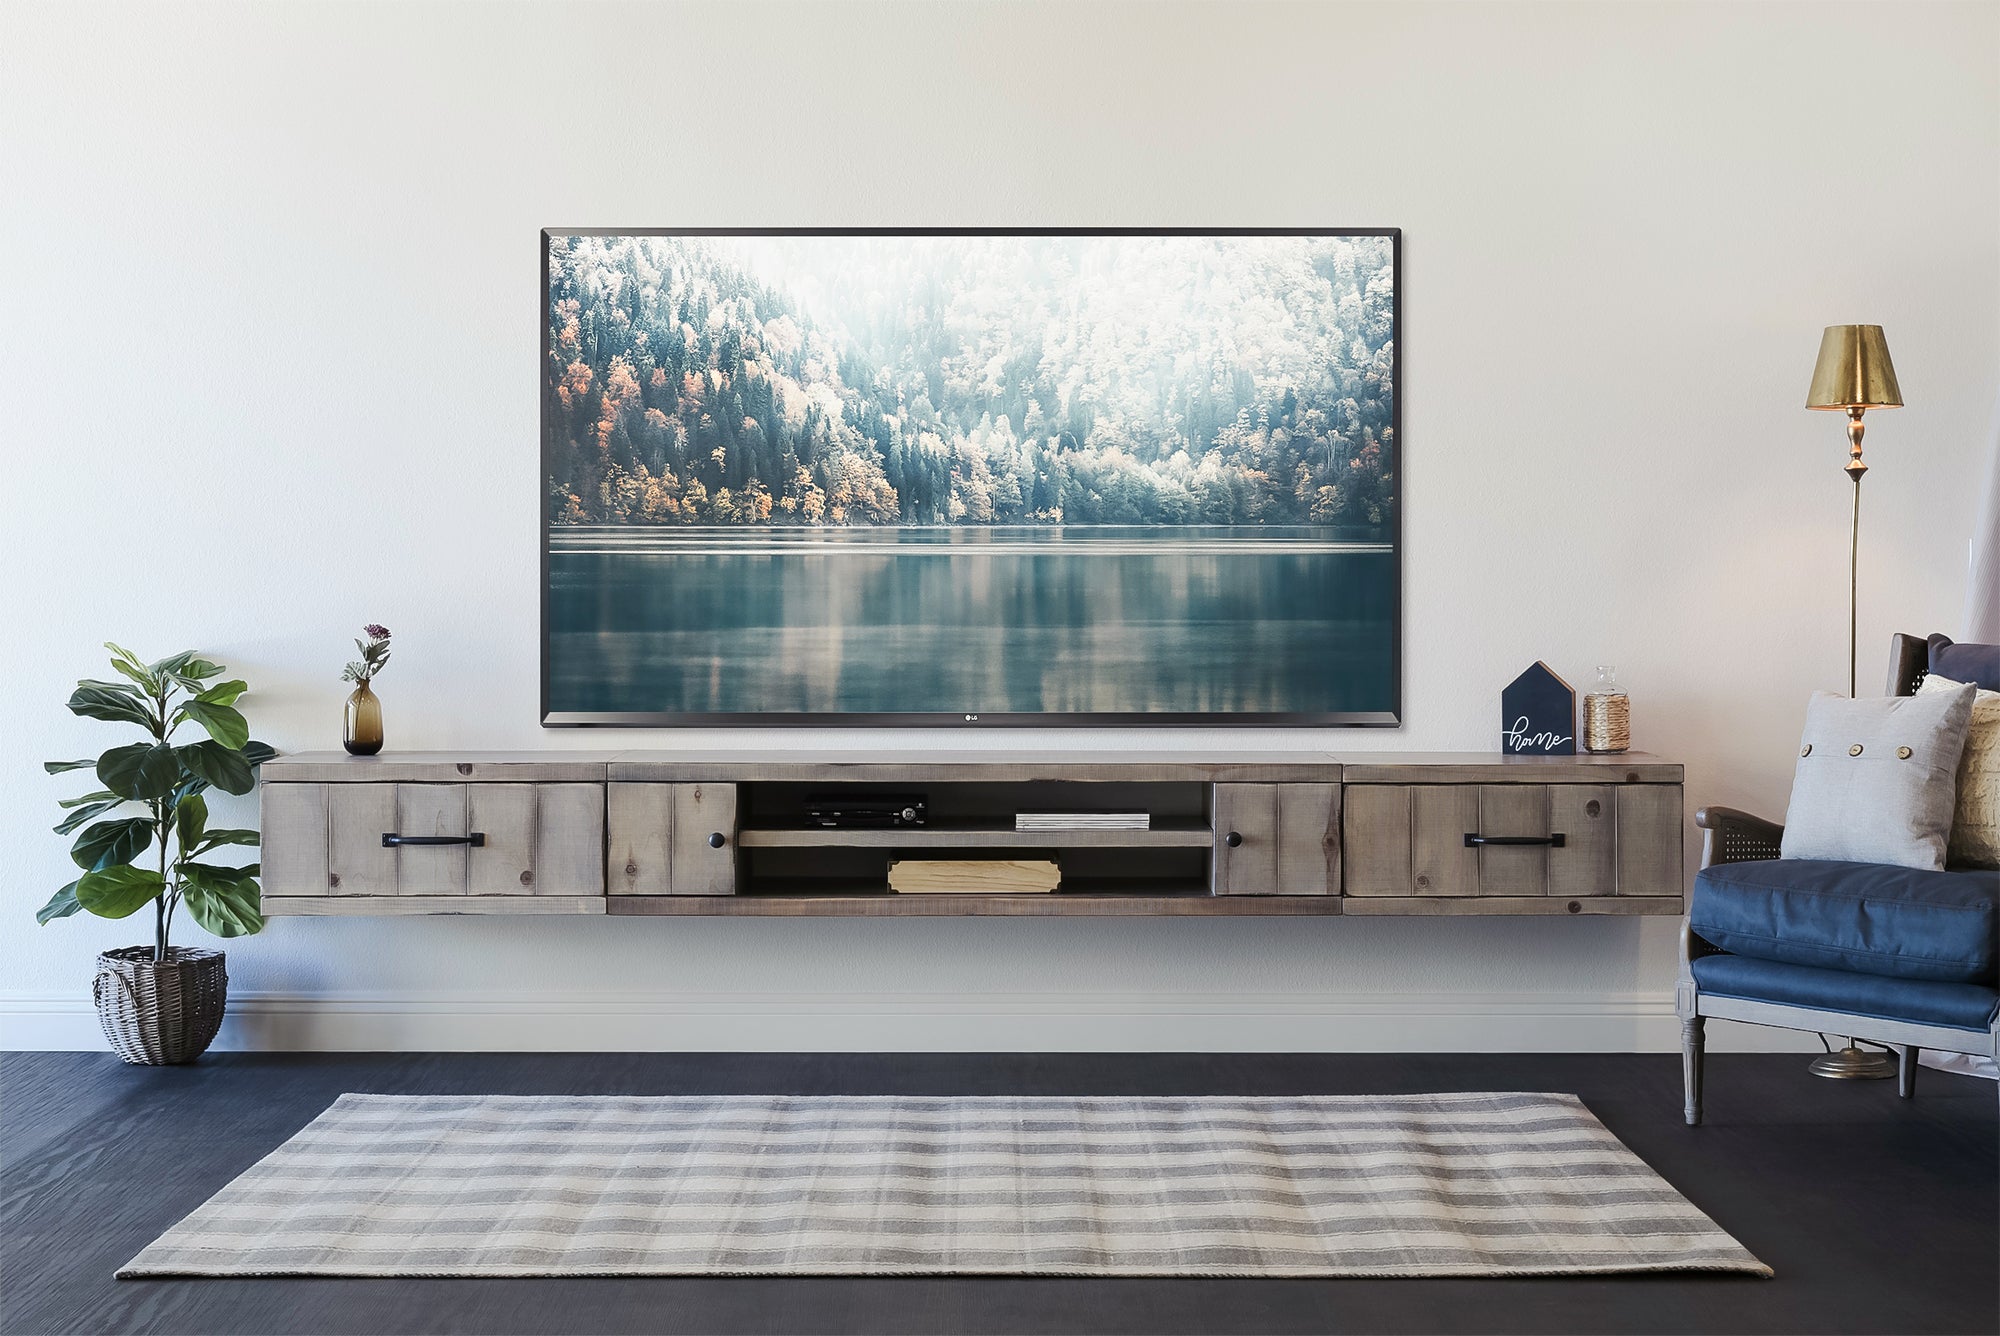 Gray Rustic Barn Wood Style Floating TV Stand Entertainment Center - Farmhouse - Lakewood